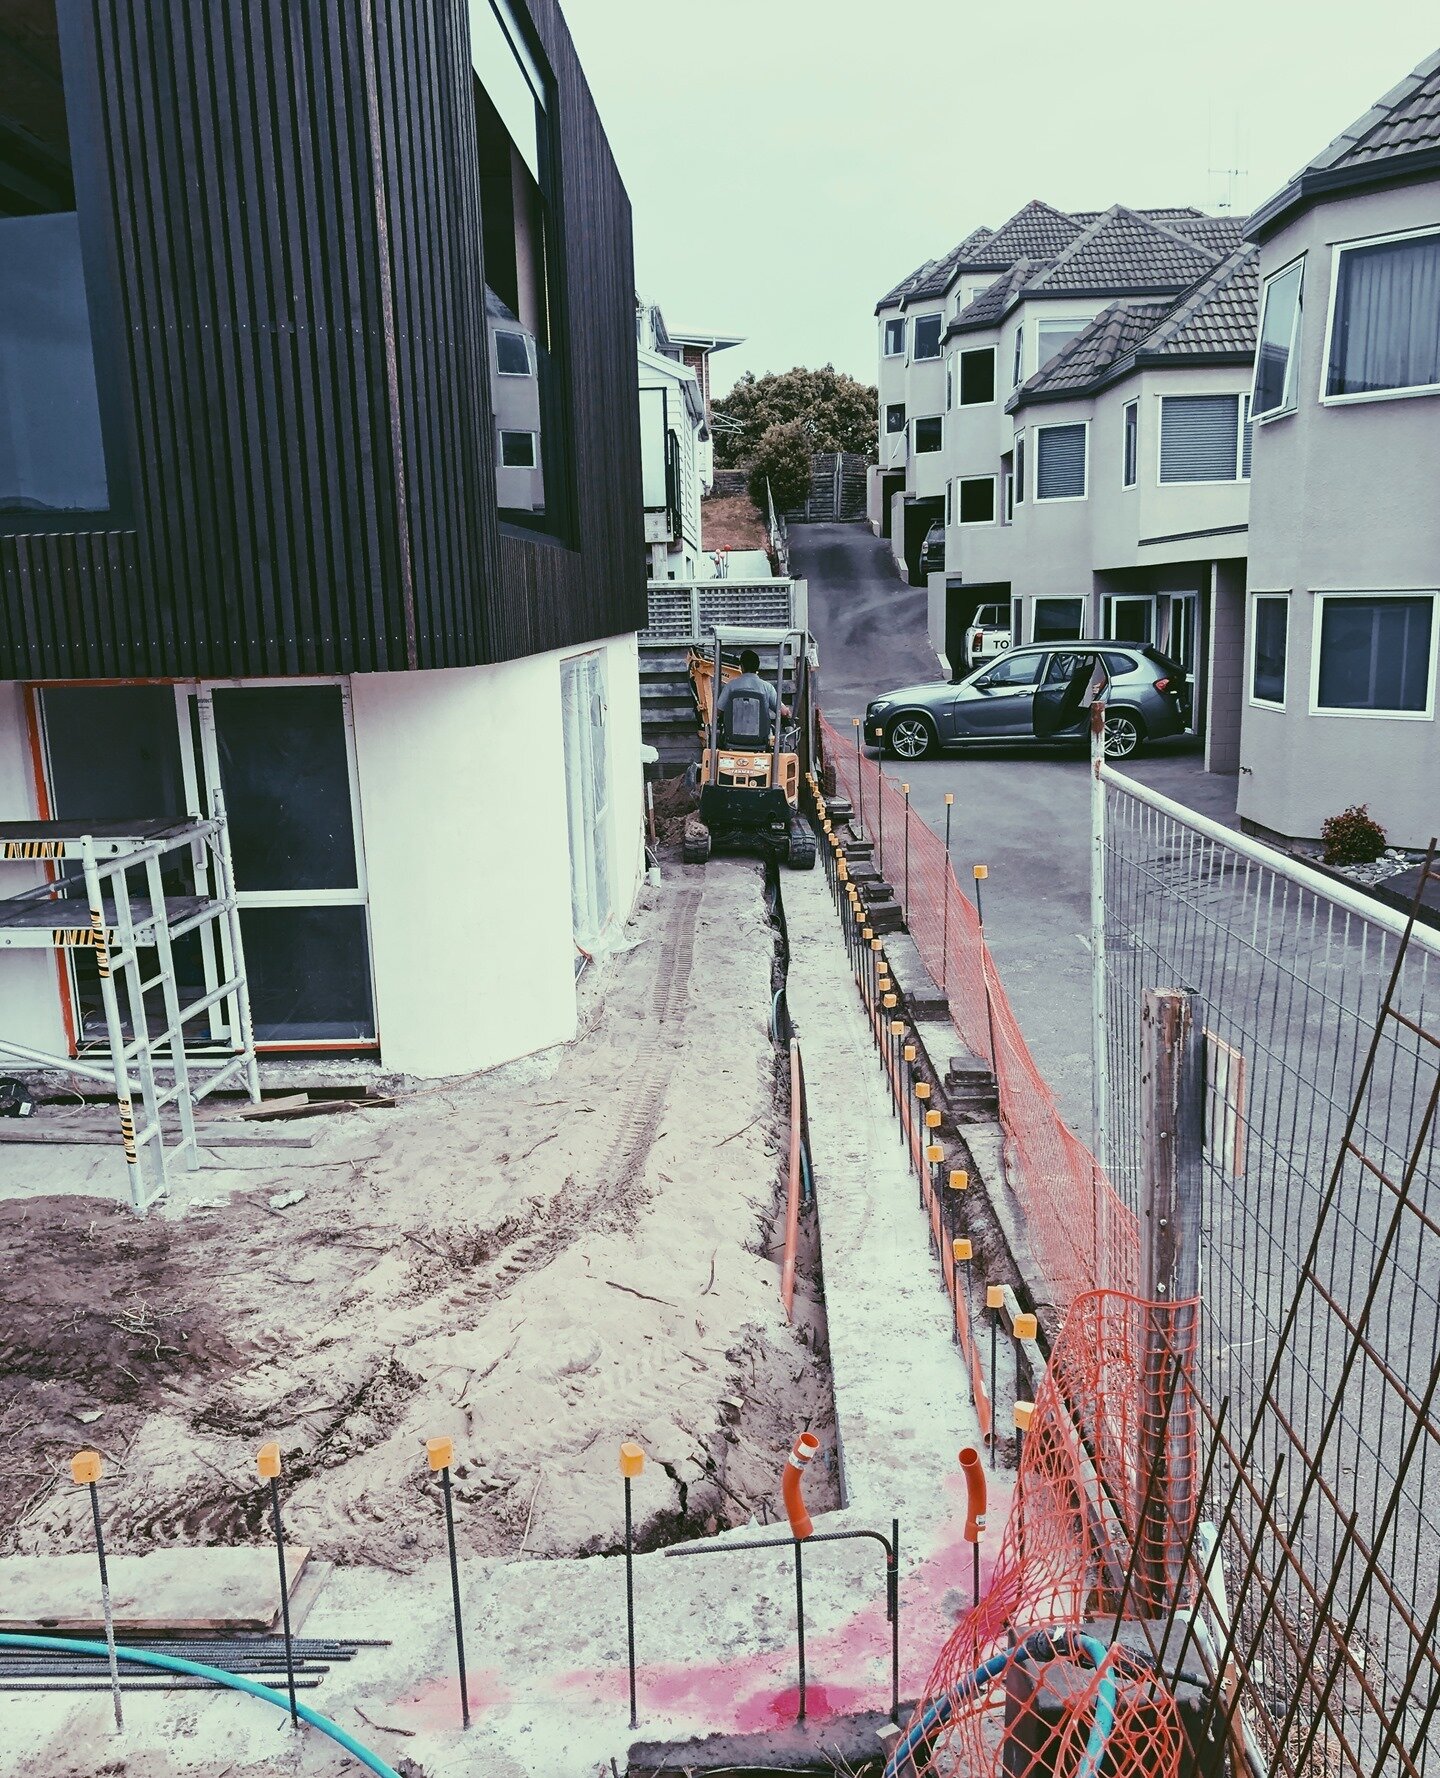 Fence foundation finally completed!⁠
Final plumbing works being installed.⁠
Tight space + digger requires a skilled operator -@TasmanPlumbingContractors 💪⁠
⁠
#renovation #rainscreen #shadows #construction #mountmaunganui #tauranga #localbuilder #bui